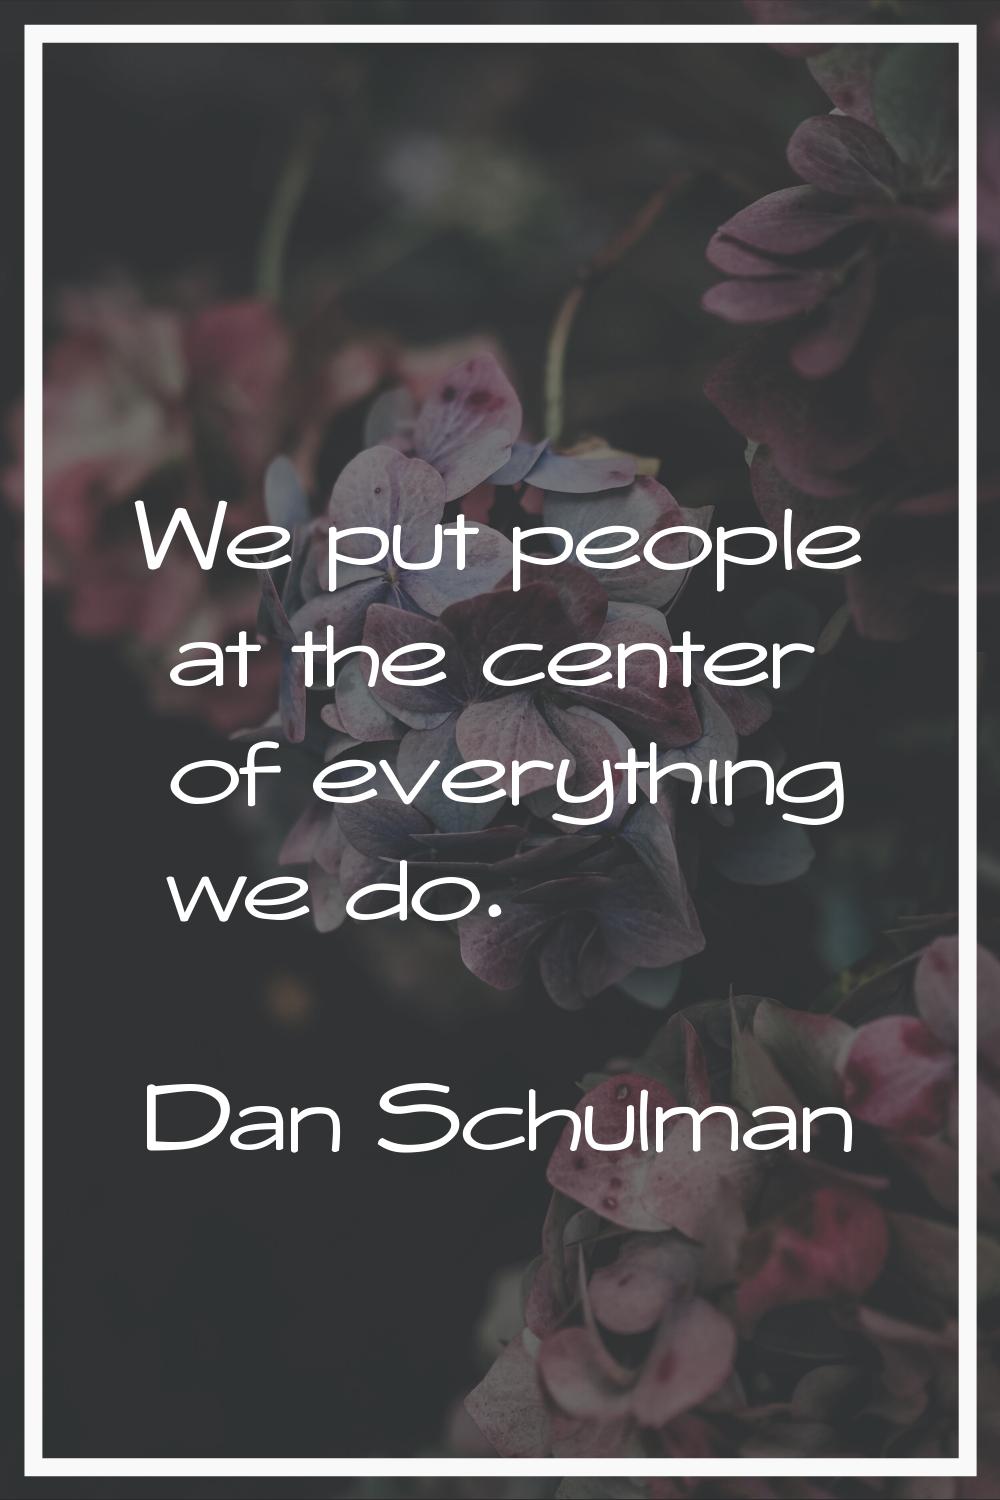 We put people at the center of everything we do.